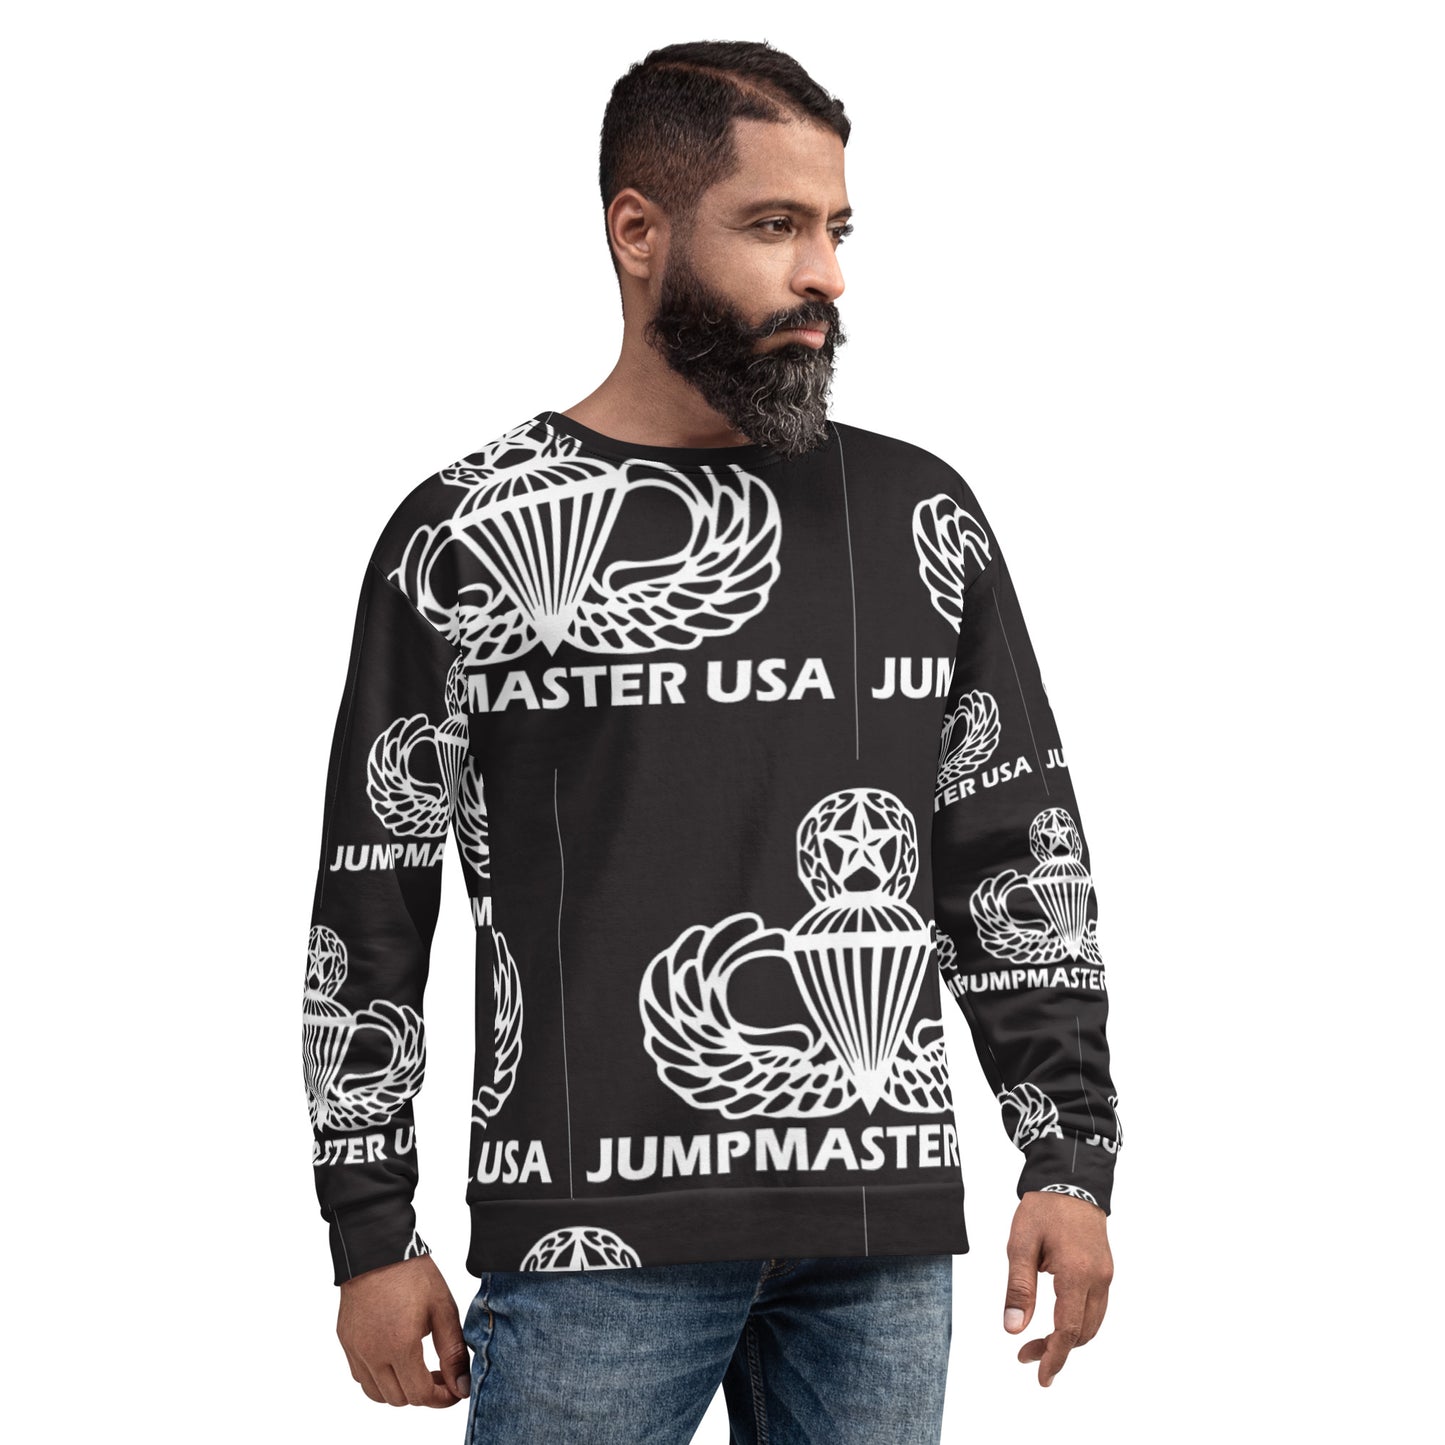 This Jumpmaster USA sweatshirt is unique and will grab all the attention at your unit BBQ or mandatory fun activity. These all-over printed sweatshirts are precision-cut and hand-sewn to achieve the best possible look and bring out the intricate design.